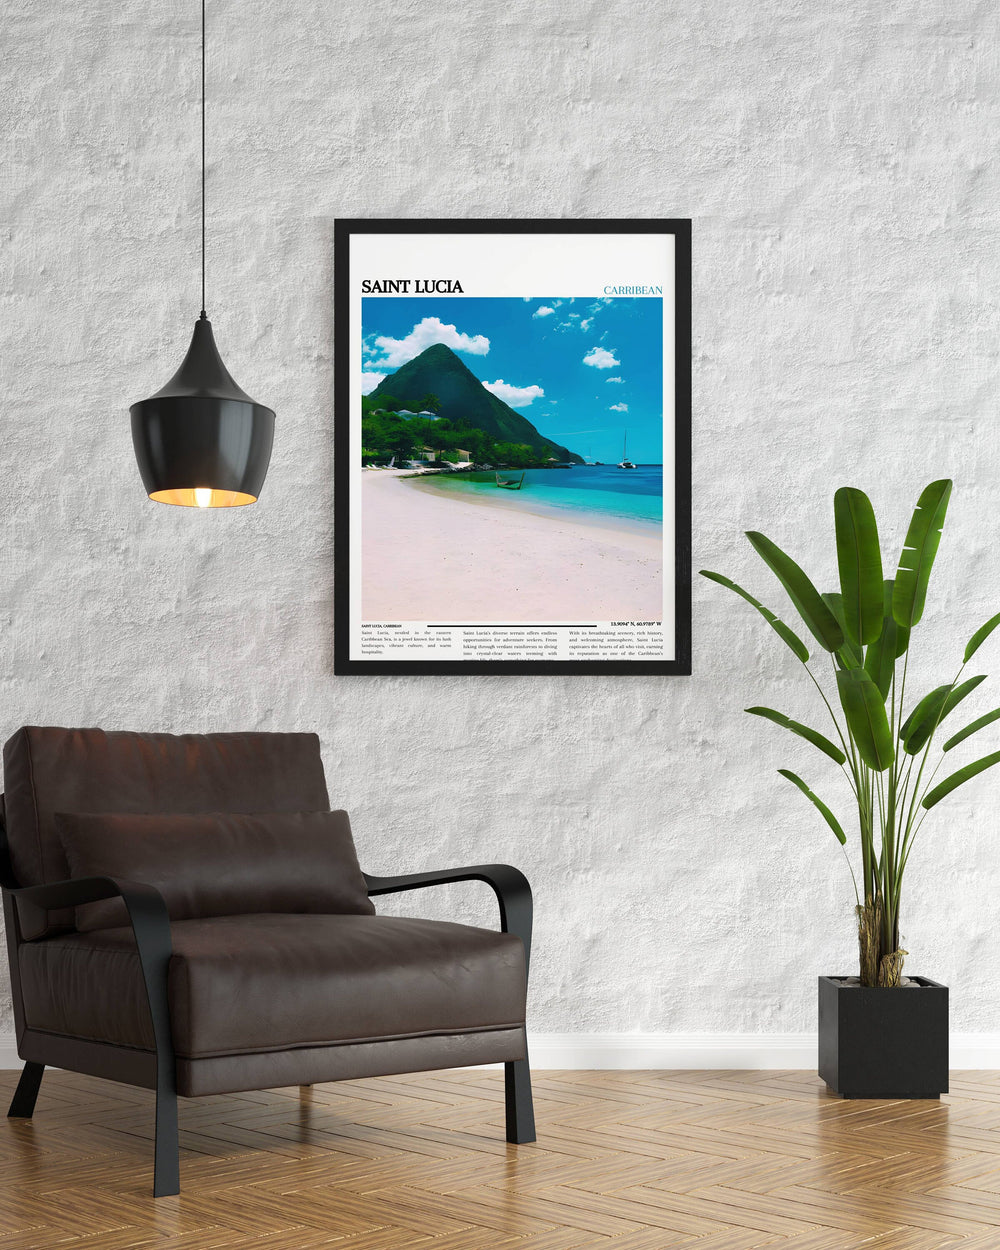 Explore Caribbean vibes with Saint Lucia-themed art. Perfect for Saint Lucia gift or decor, this wall art brings island magic home